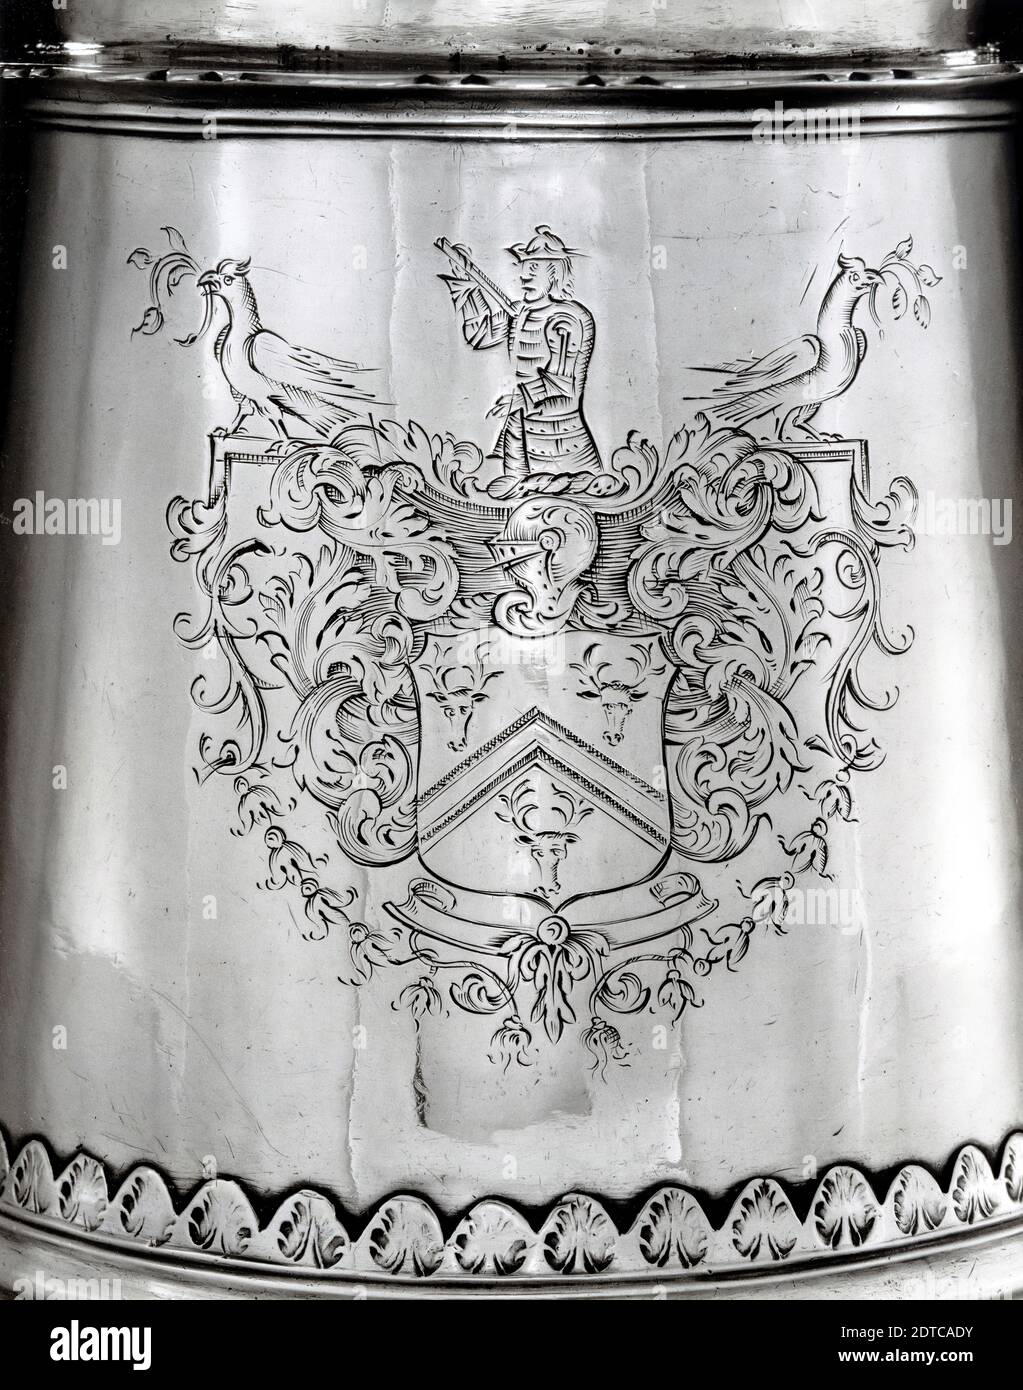 Maker: John Brevoort, w. c. 1742 - 1764, Tankard, ca. 1735–45, Silver, 6  5/8 in. (16.8 cm), Made in New York, New York, American, 18th century,  Containers - Metals Stock Photo - Alamy